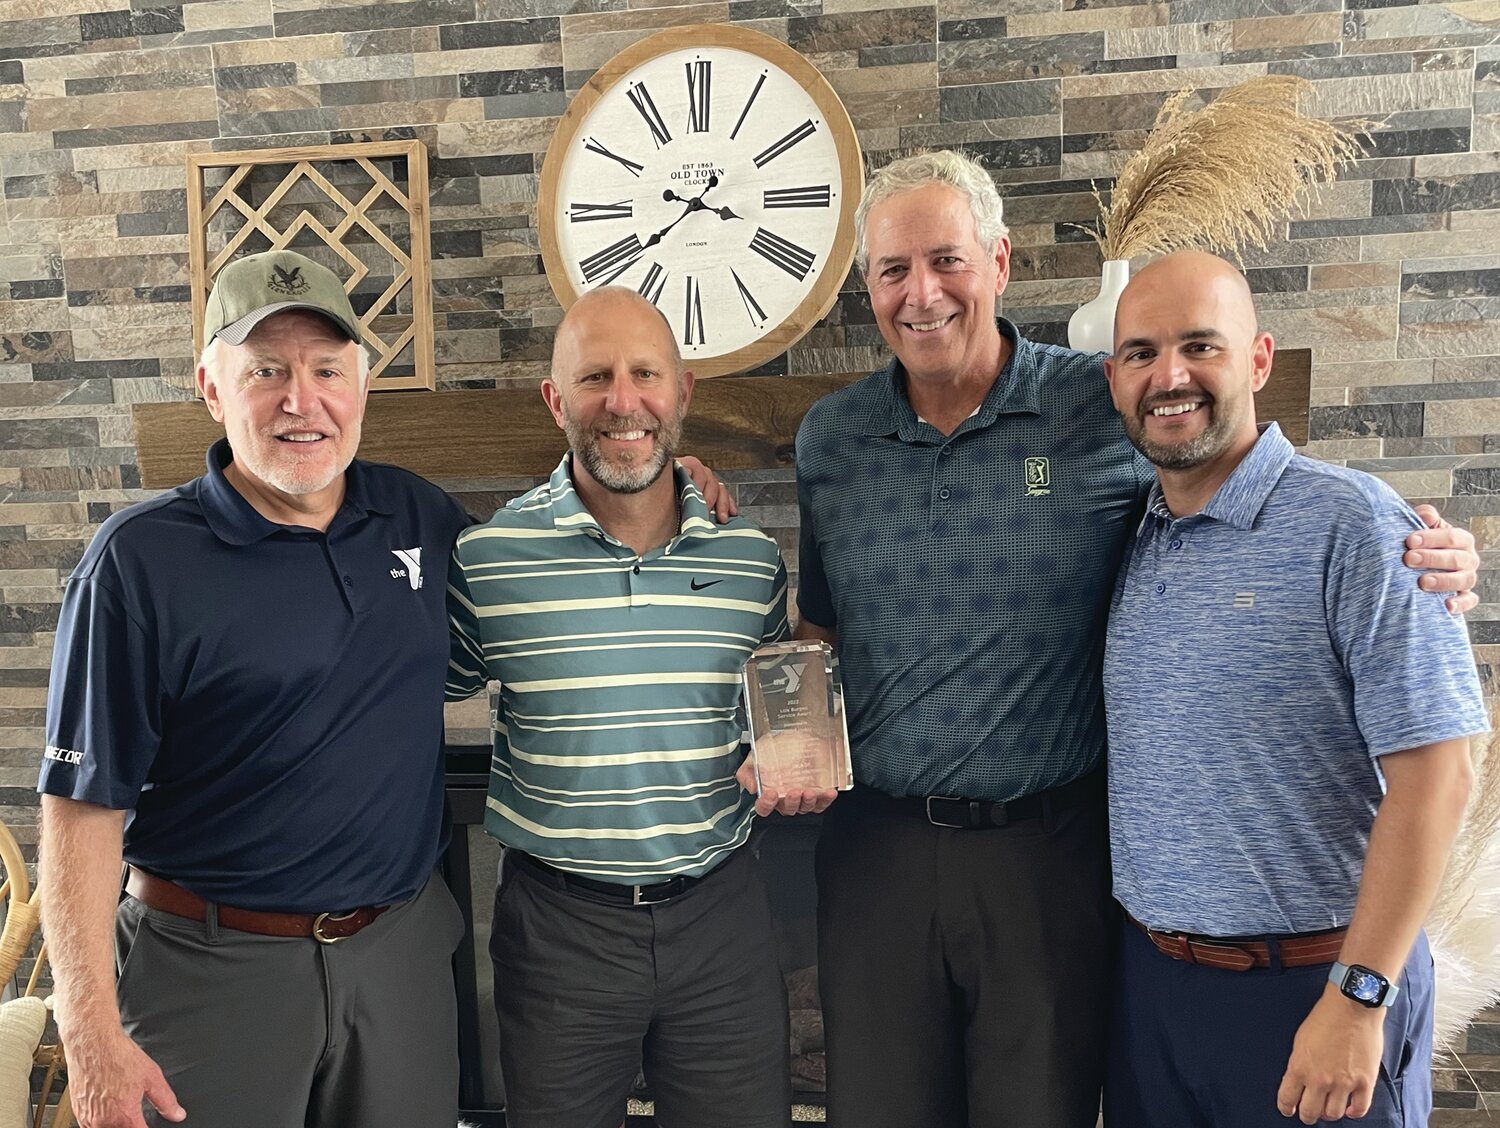 From left are: Chief Volunteer Officer of YMCA of Bucks and Hunterdon Counties Allen Childs with President/CEO Zane Moore, Burpee Award recipient Rich Lovely and Association Vice CVO Nick Yelicanin.